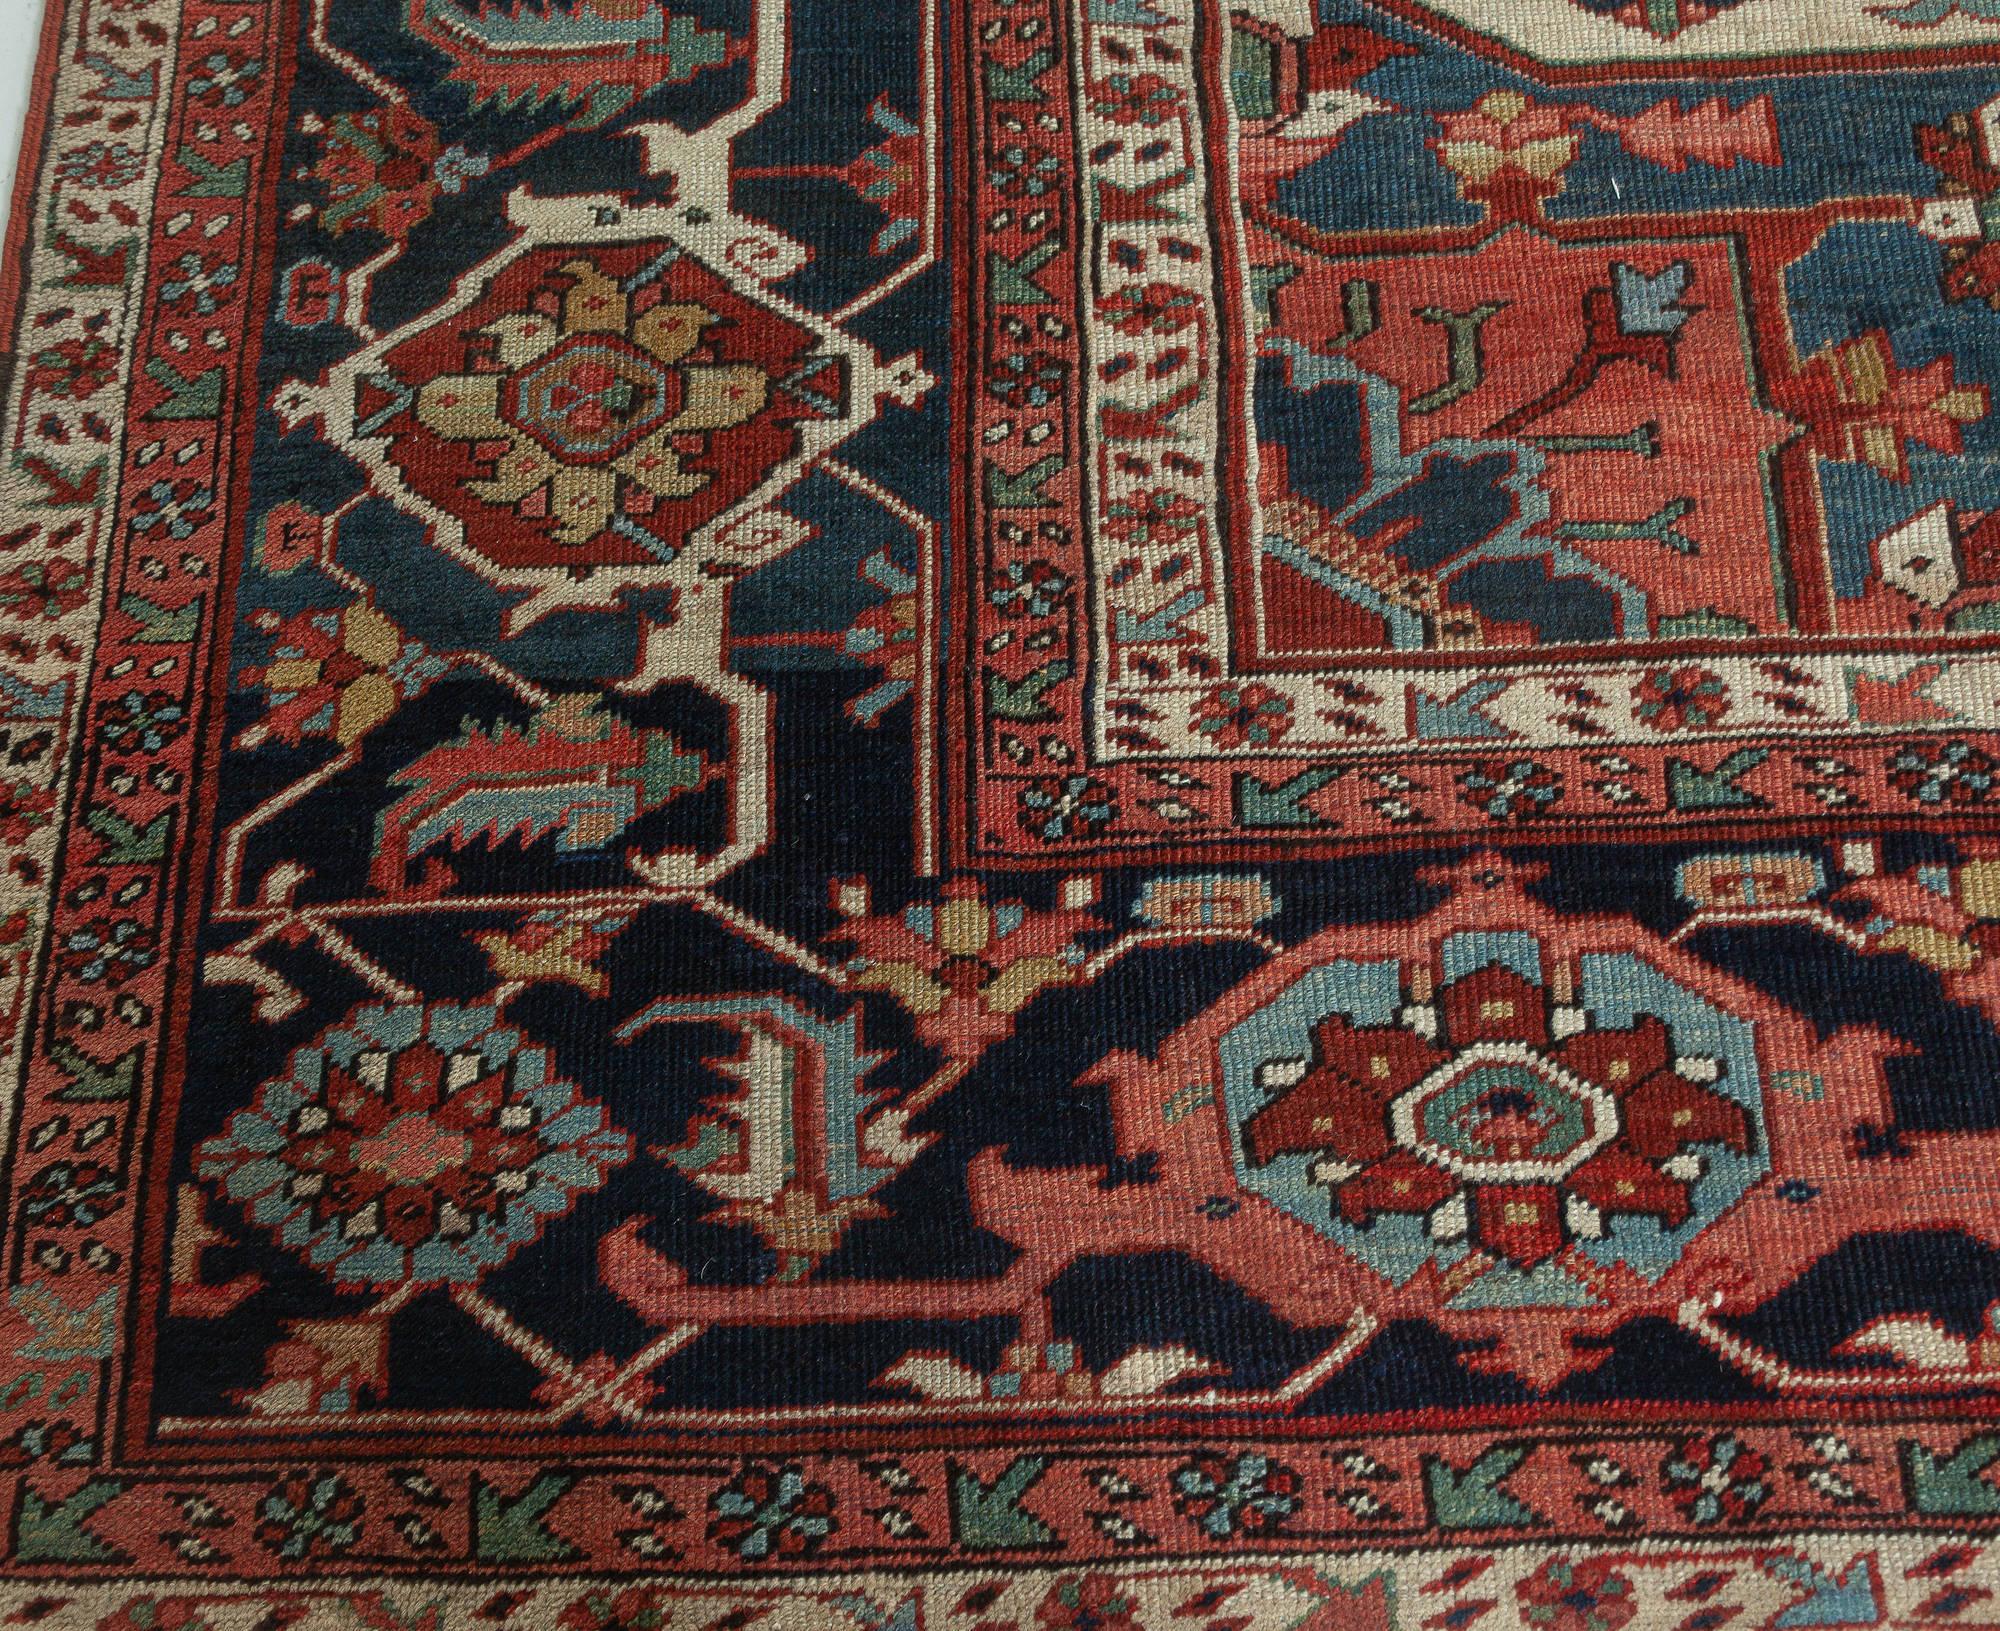 20th Century One-of-a-kind Antique Persian Heriz Rug in Beige, Blue, Pink, and Red